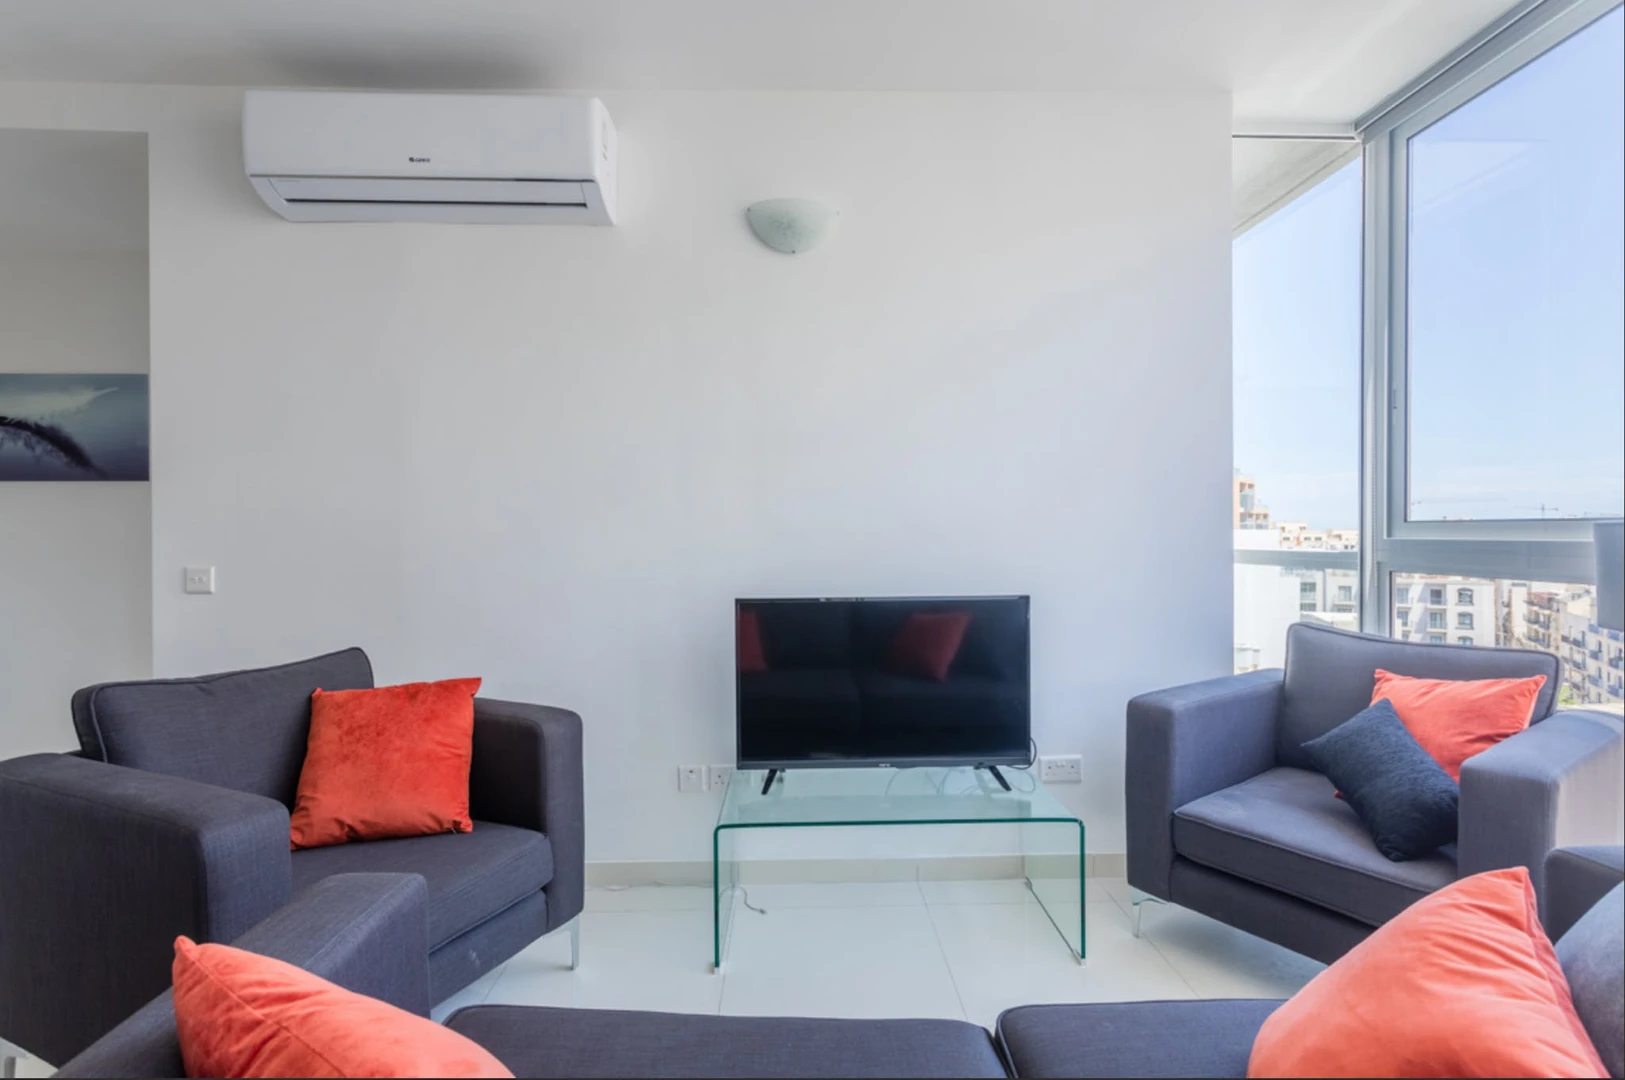 Accommodation in the centre of Malta